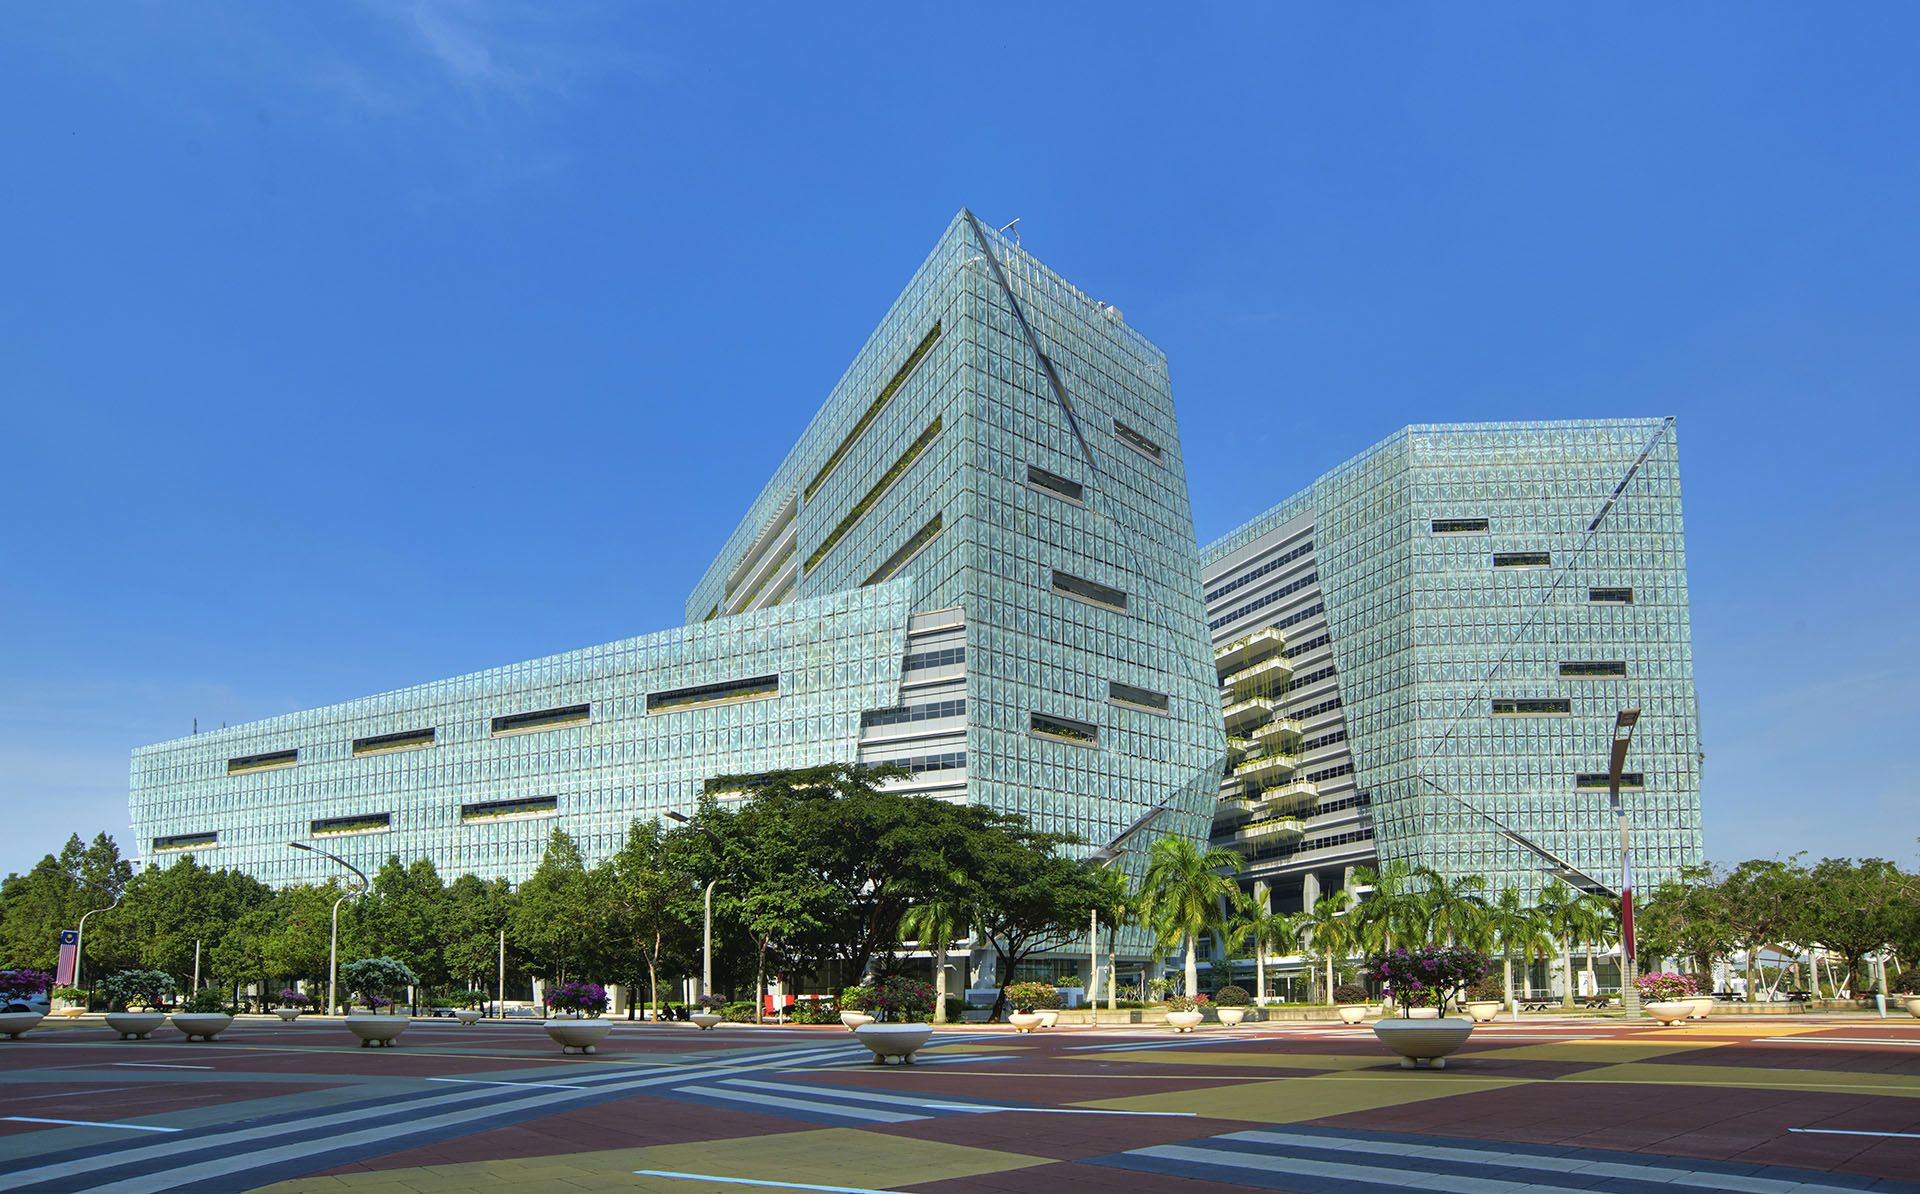 <p>The retail-and-office complex is located in Putrajaya, the new city that is Malaysia’s federal administrative centre.</p>